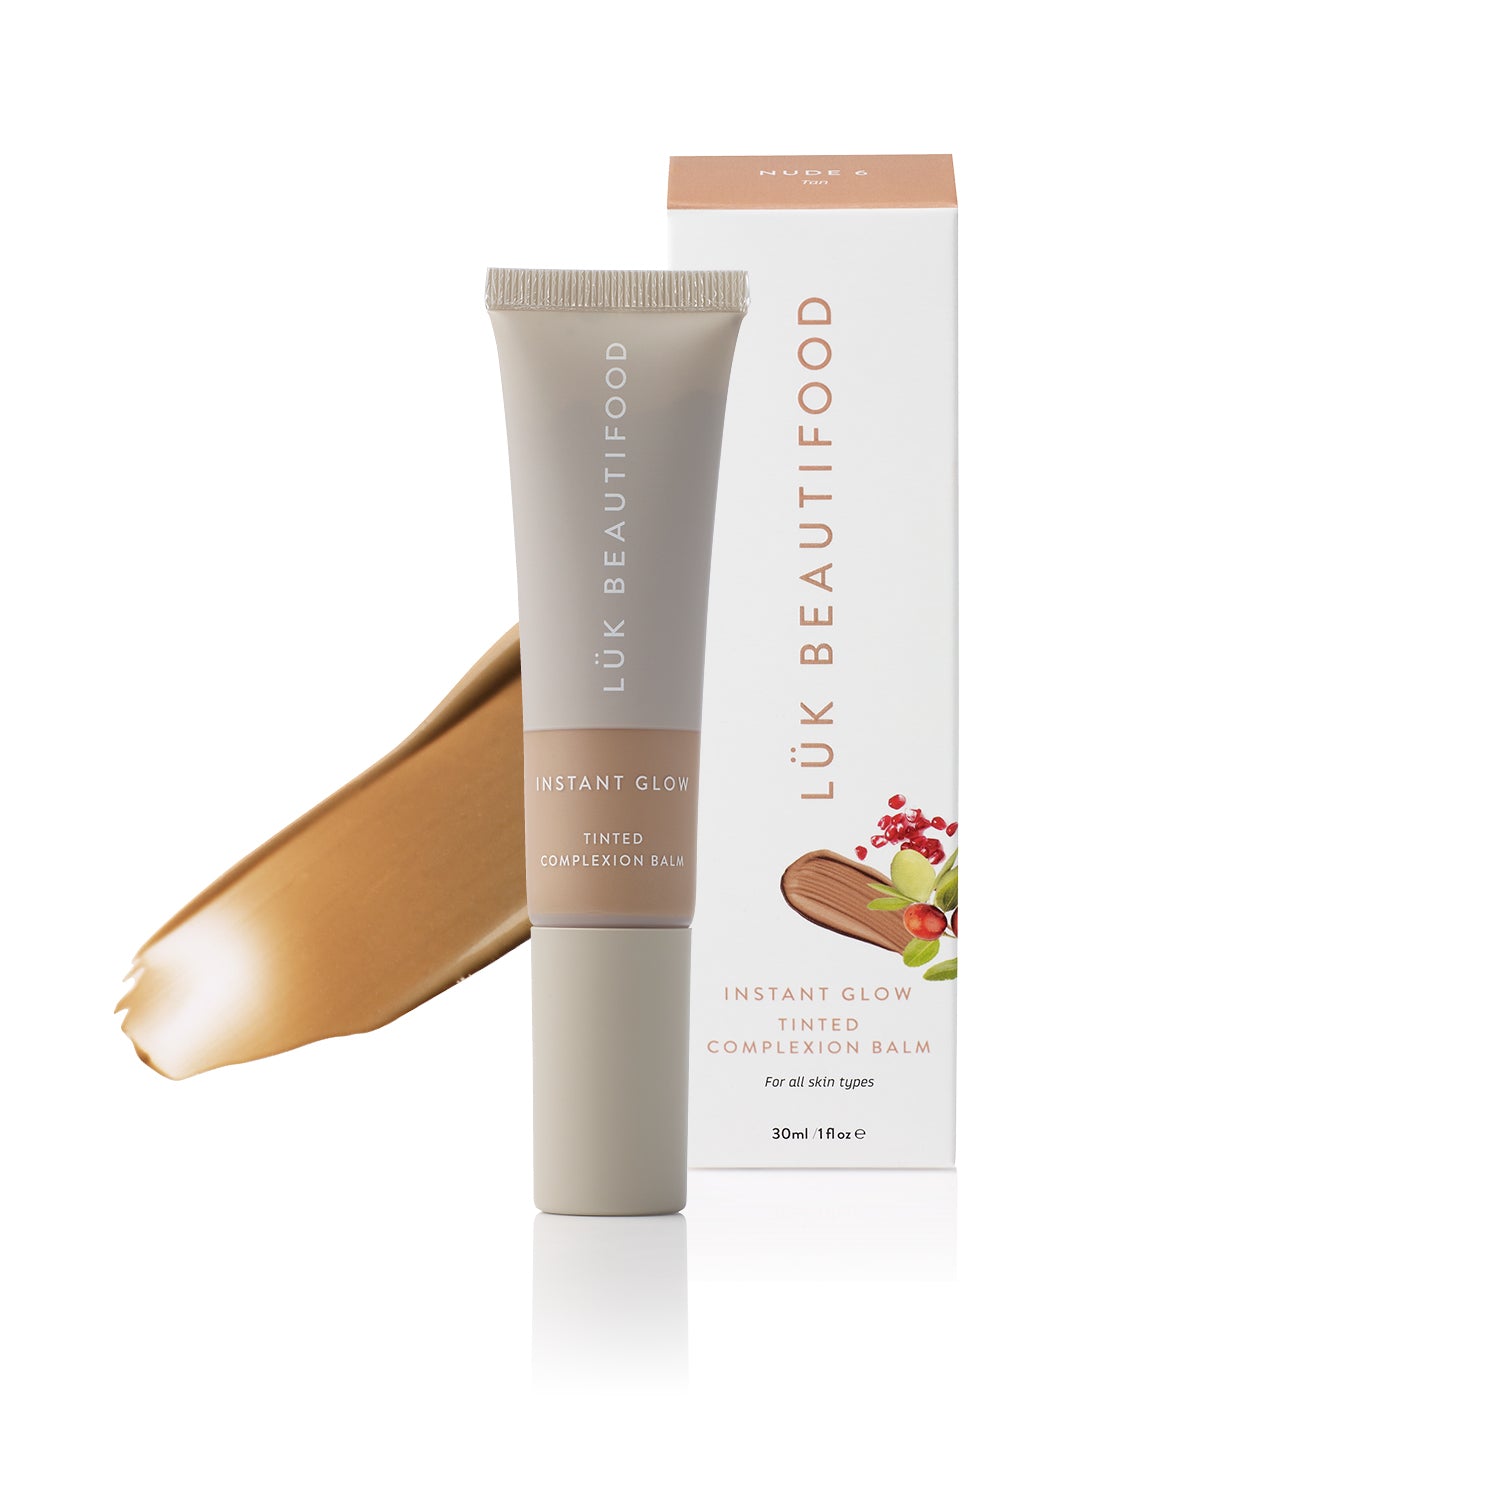 Luk Beautifood skin tint with natural finish in Nude 6